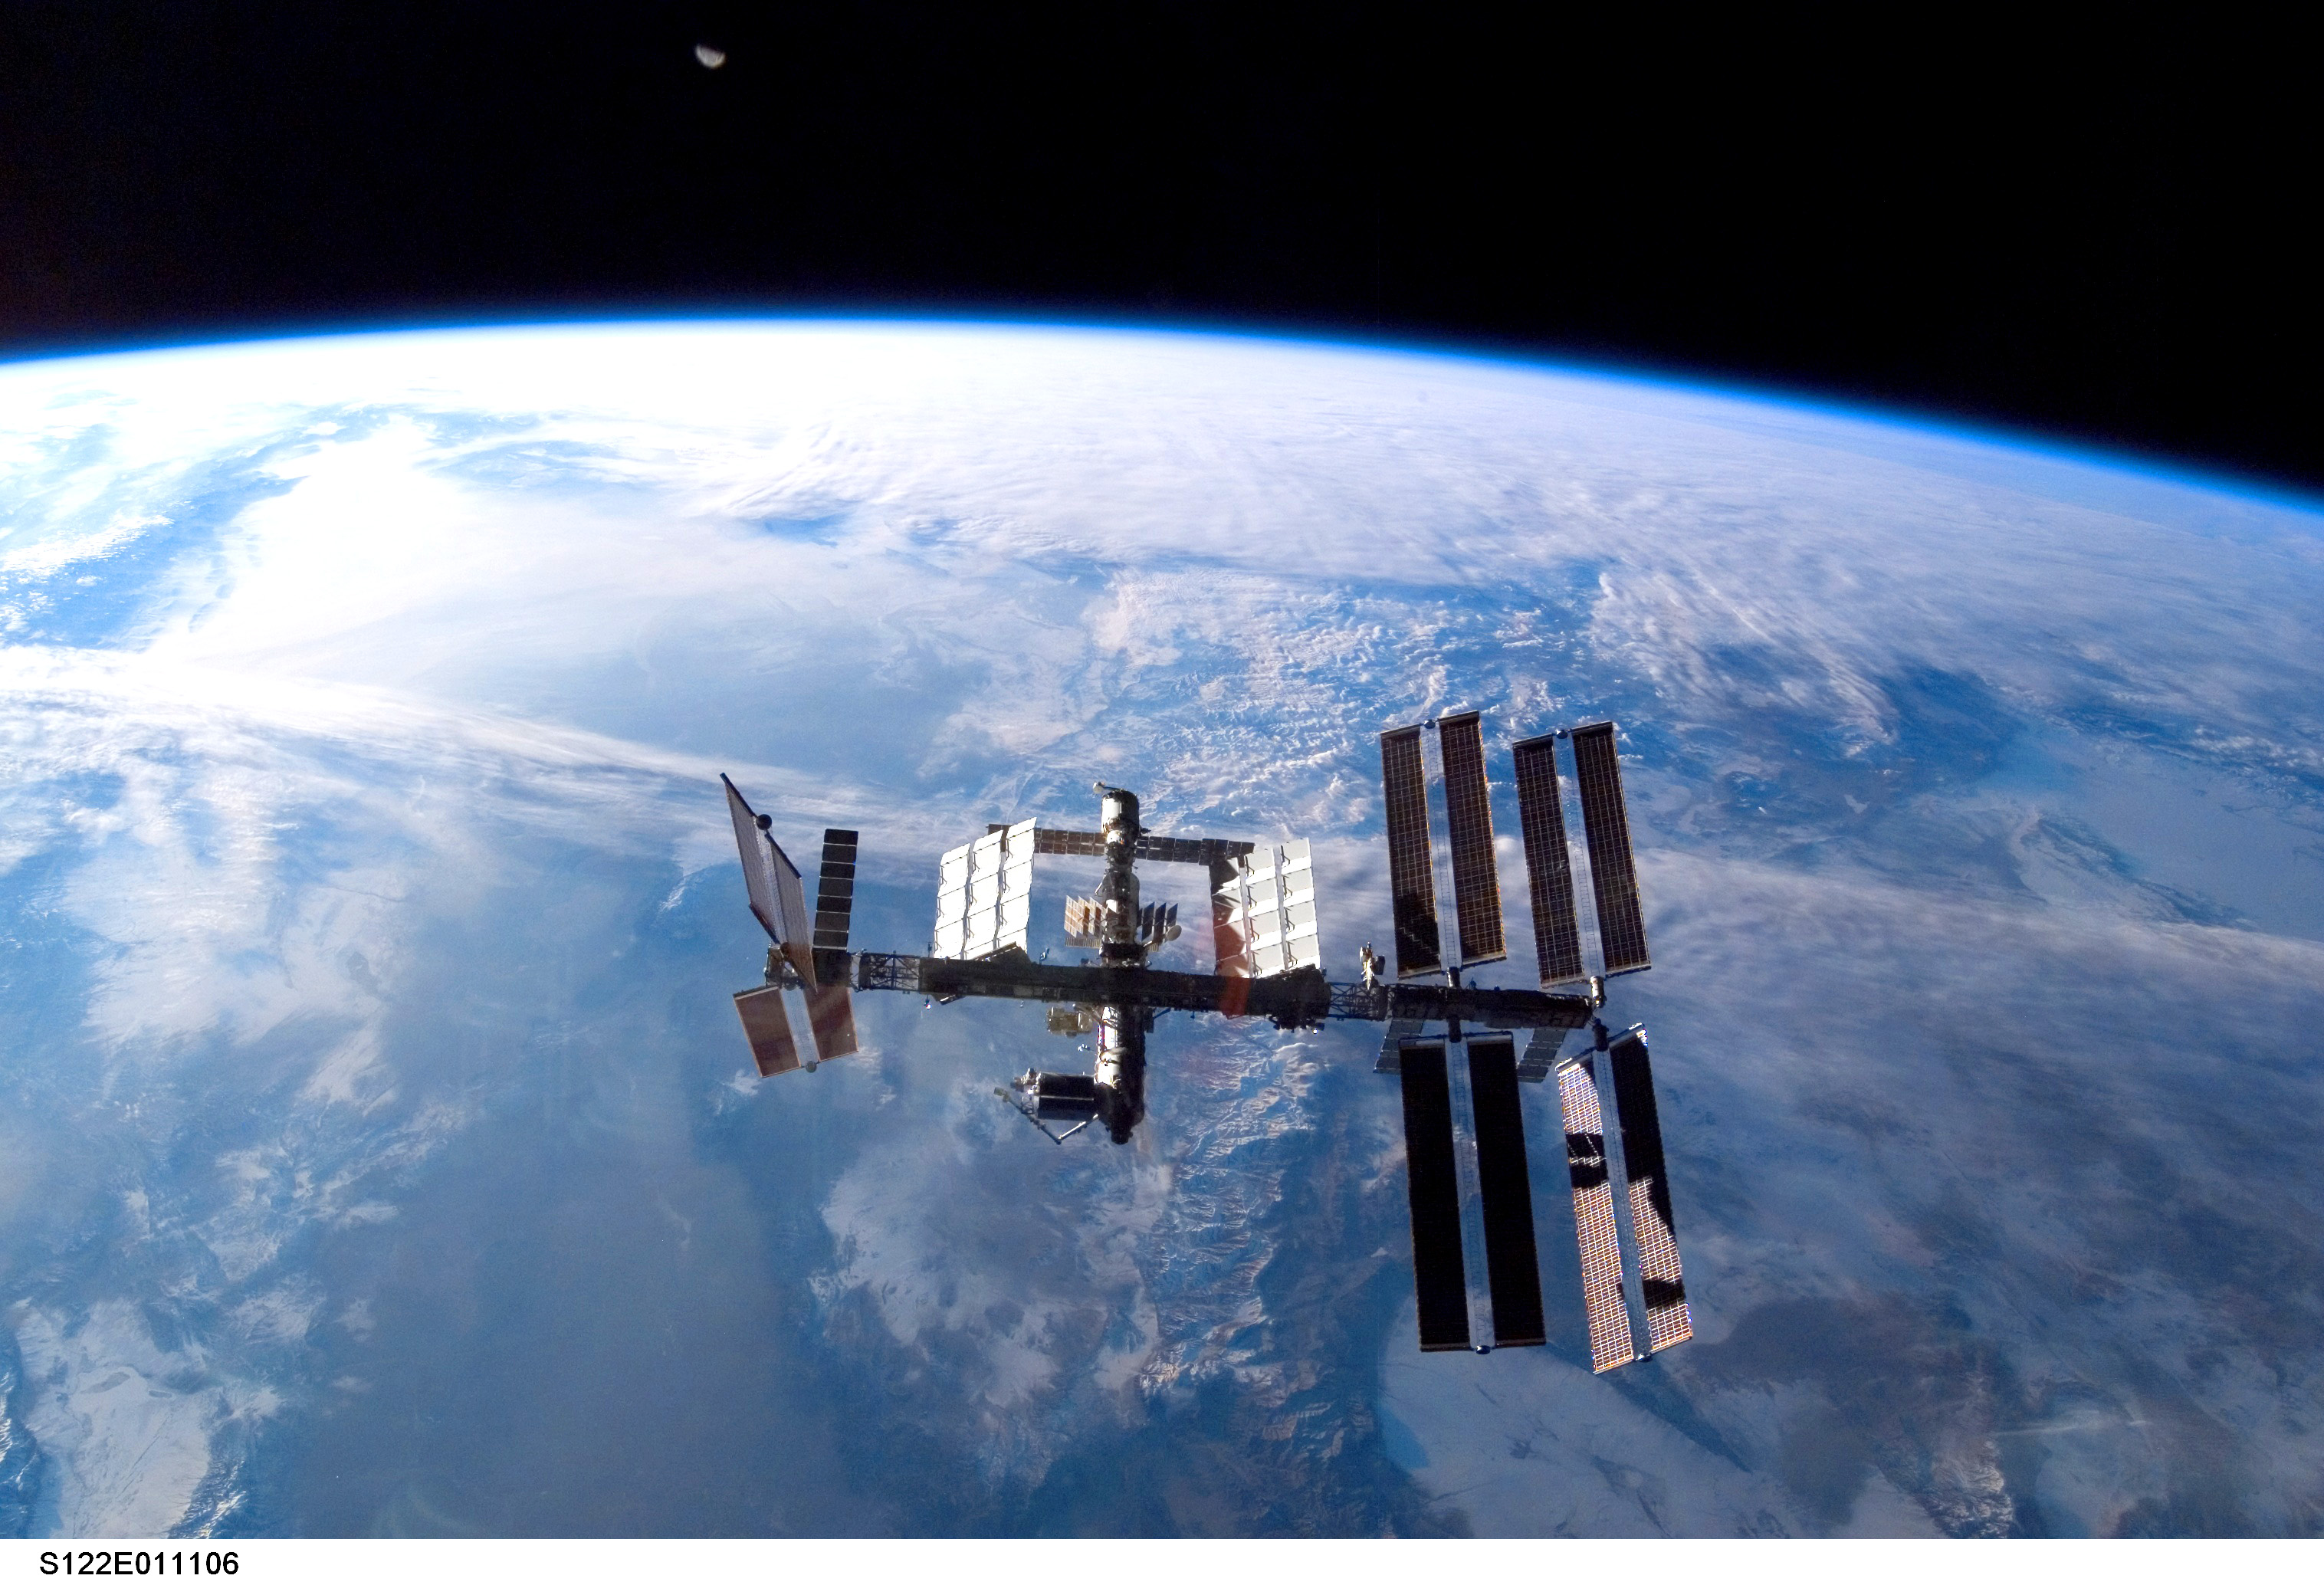 Space in Images - 2008 - 03 - International Space Station seen from ...